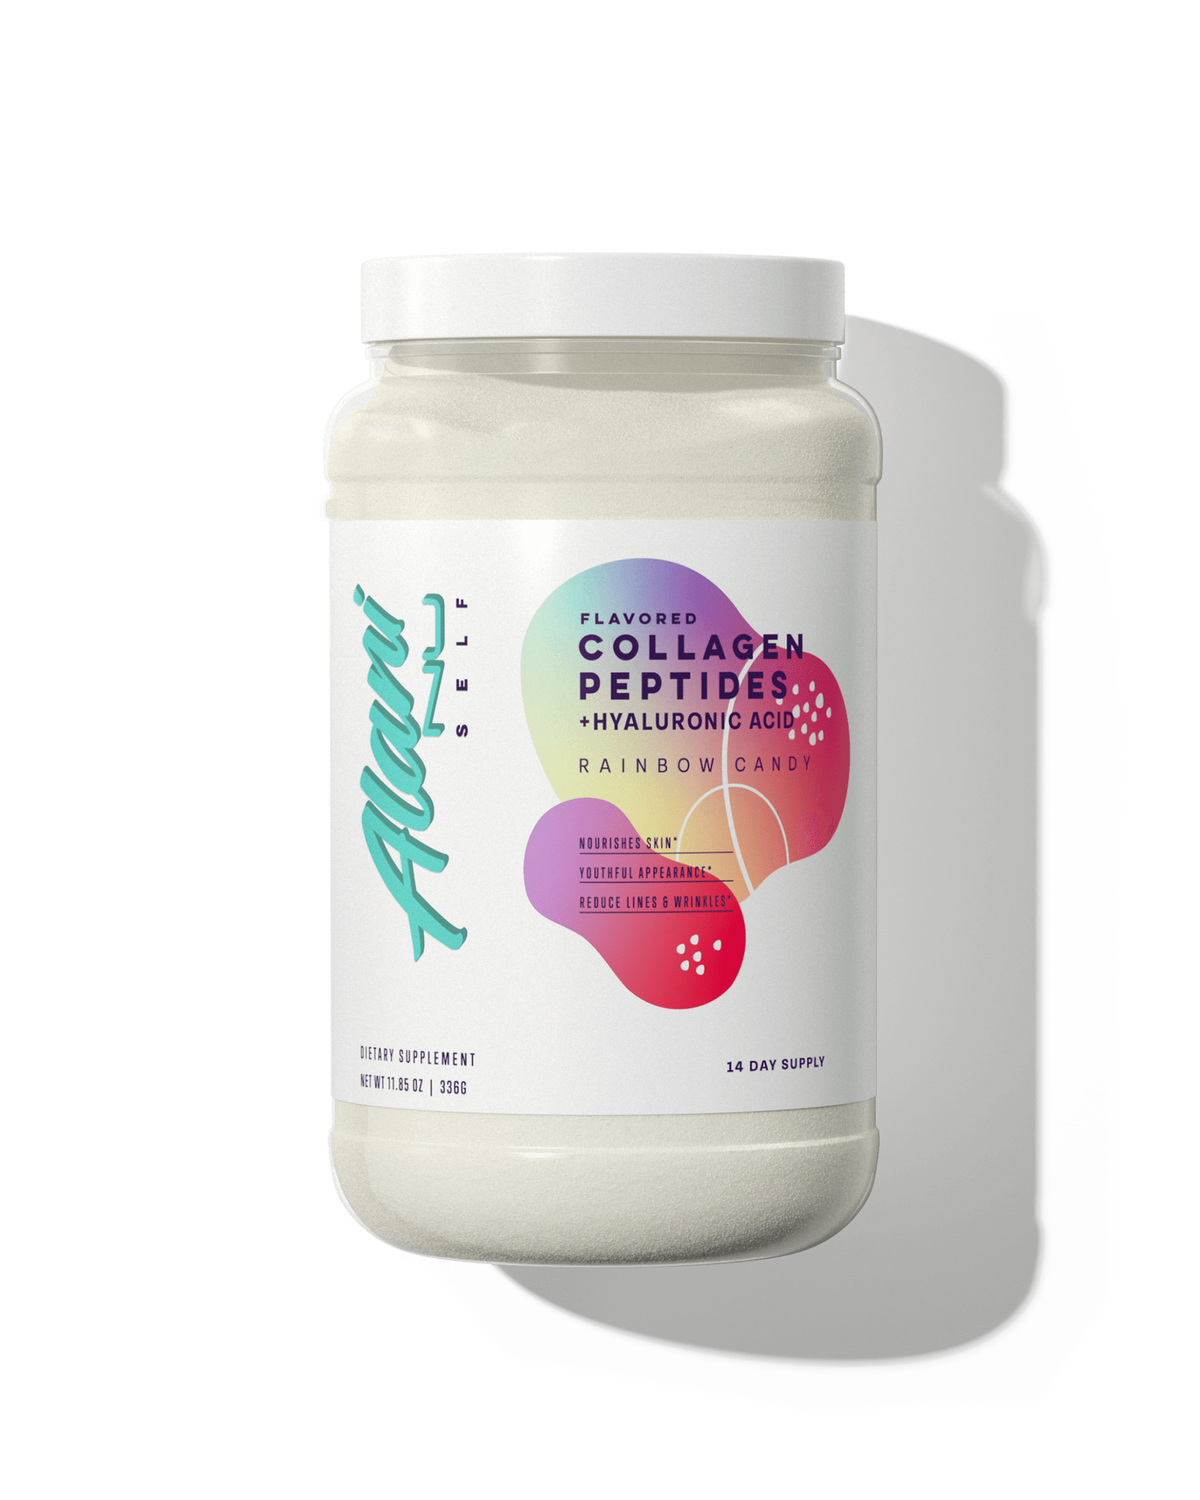 A 14-day supply container of Collagen Peptides in Rainbow Candy flavor.